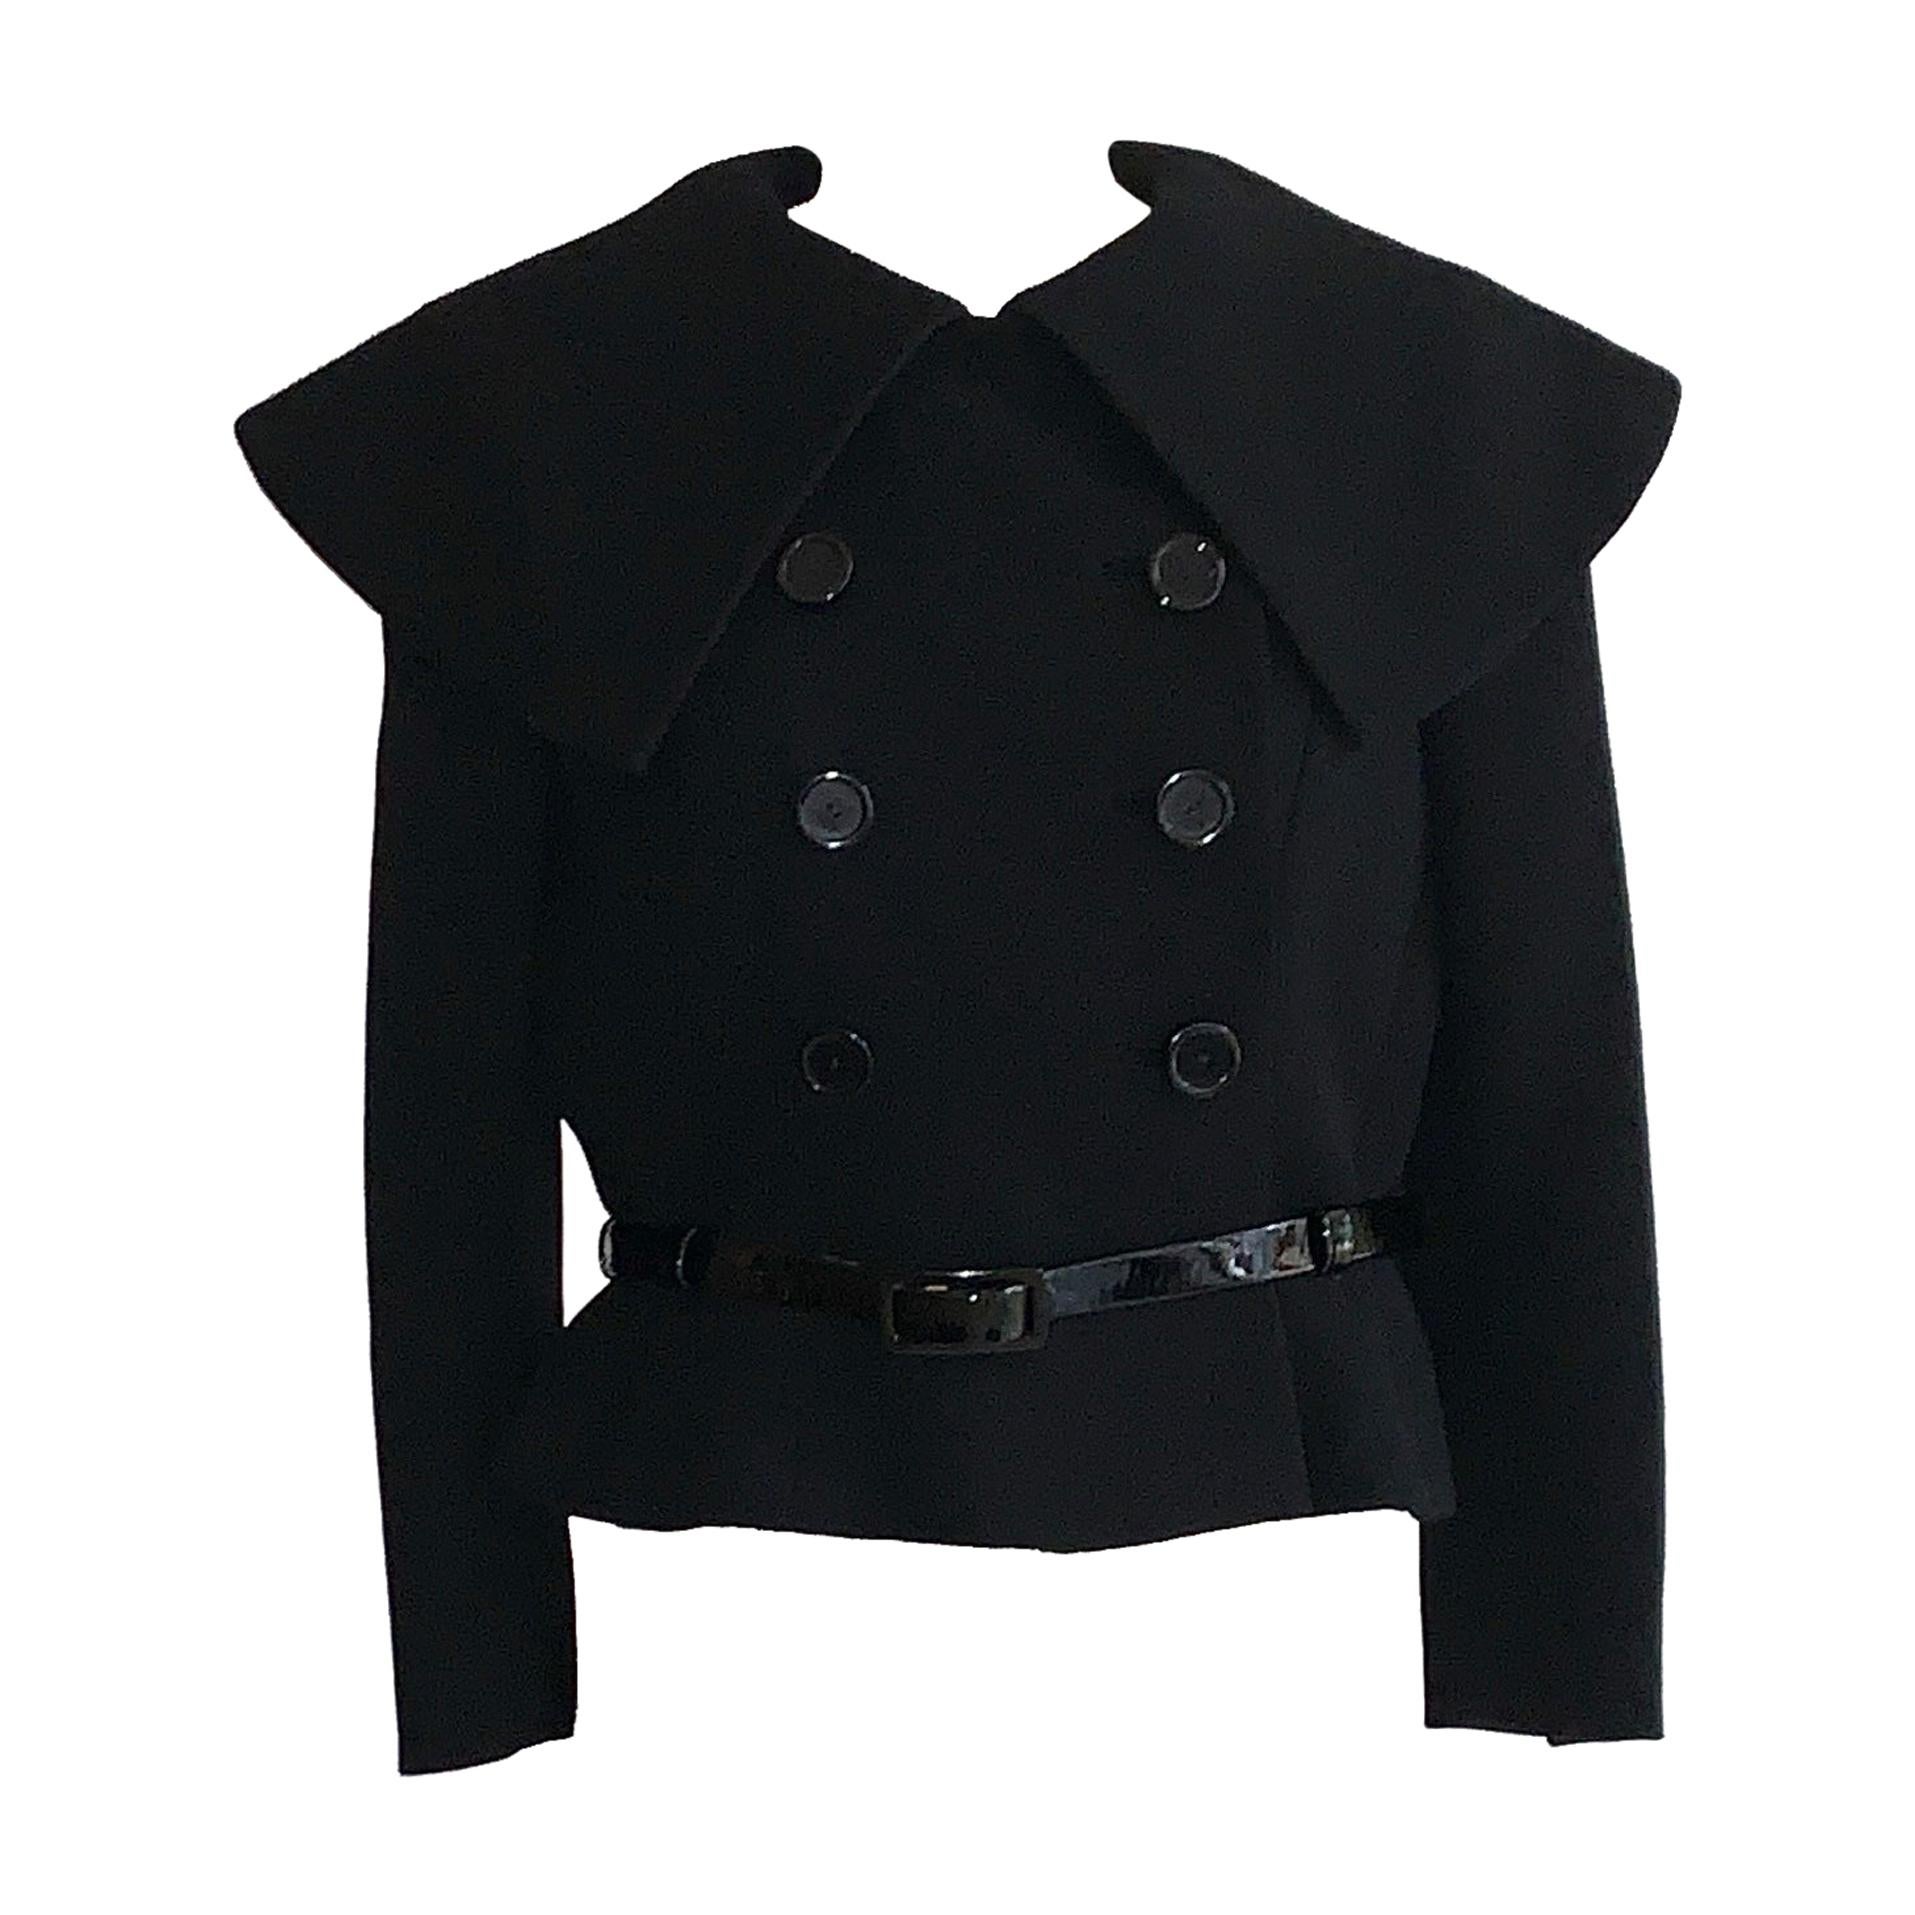 Norman Norell 1960s Black Belted Jacket with Statement Collar